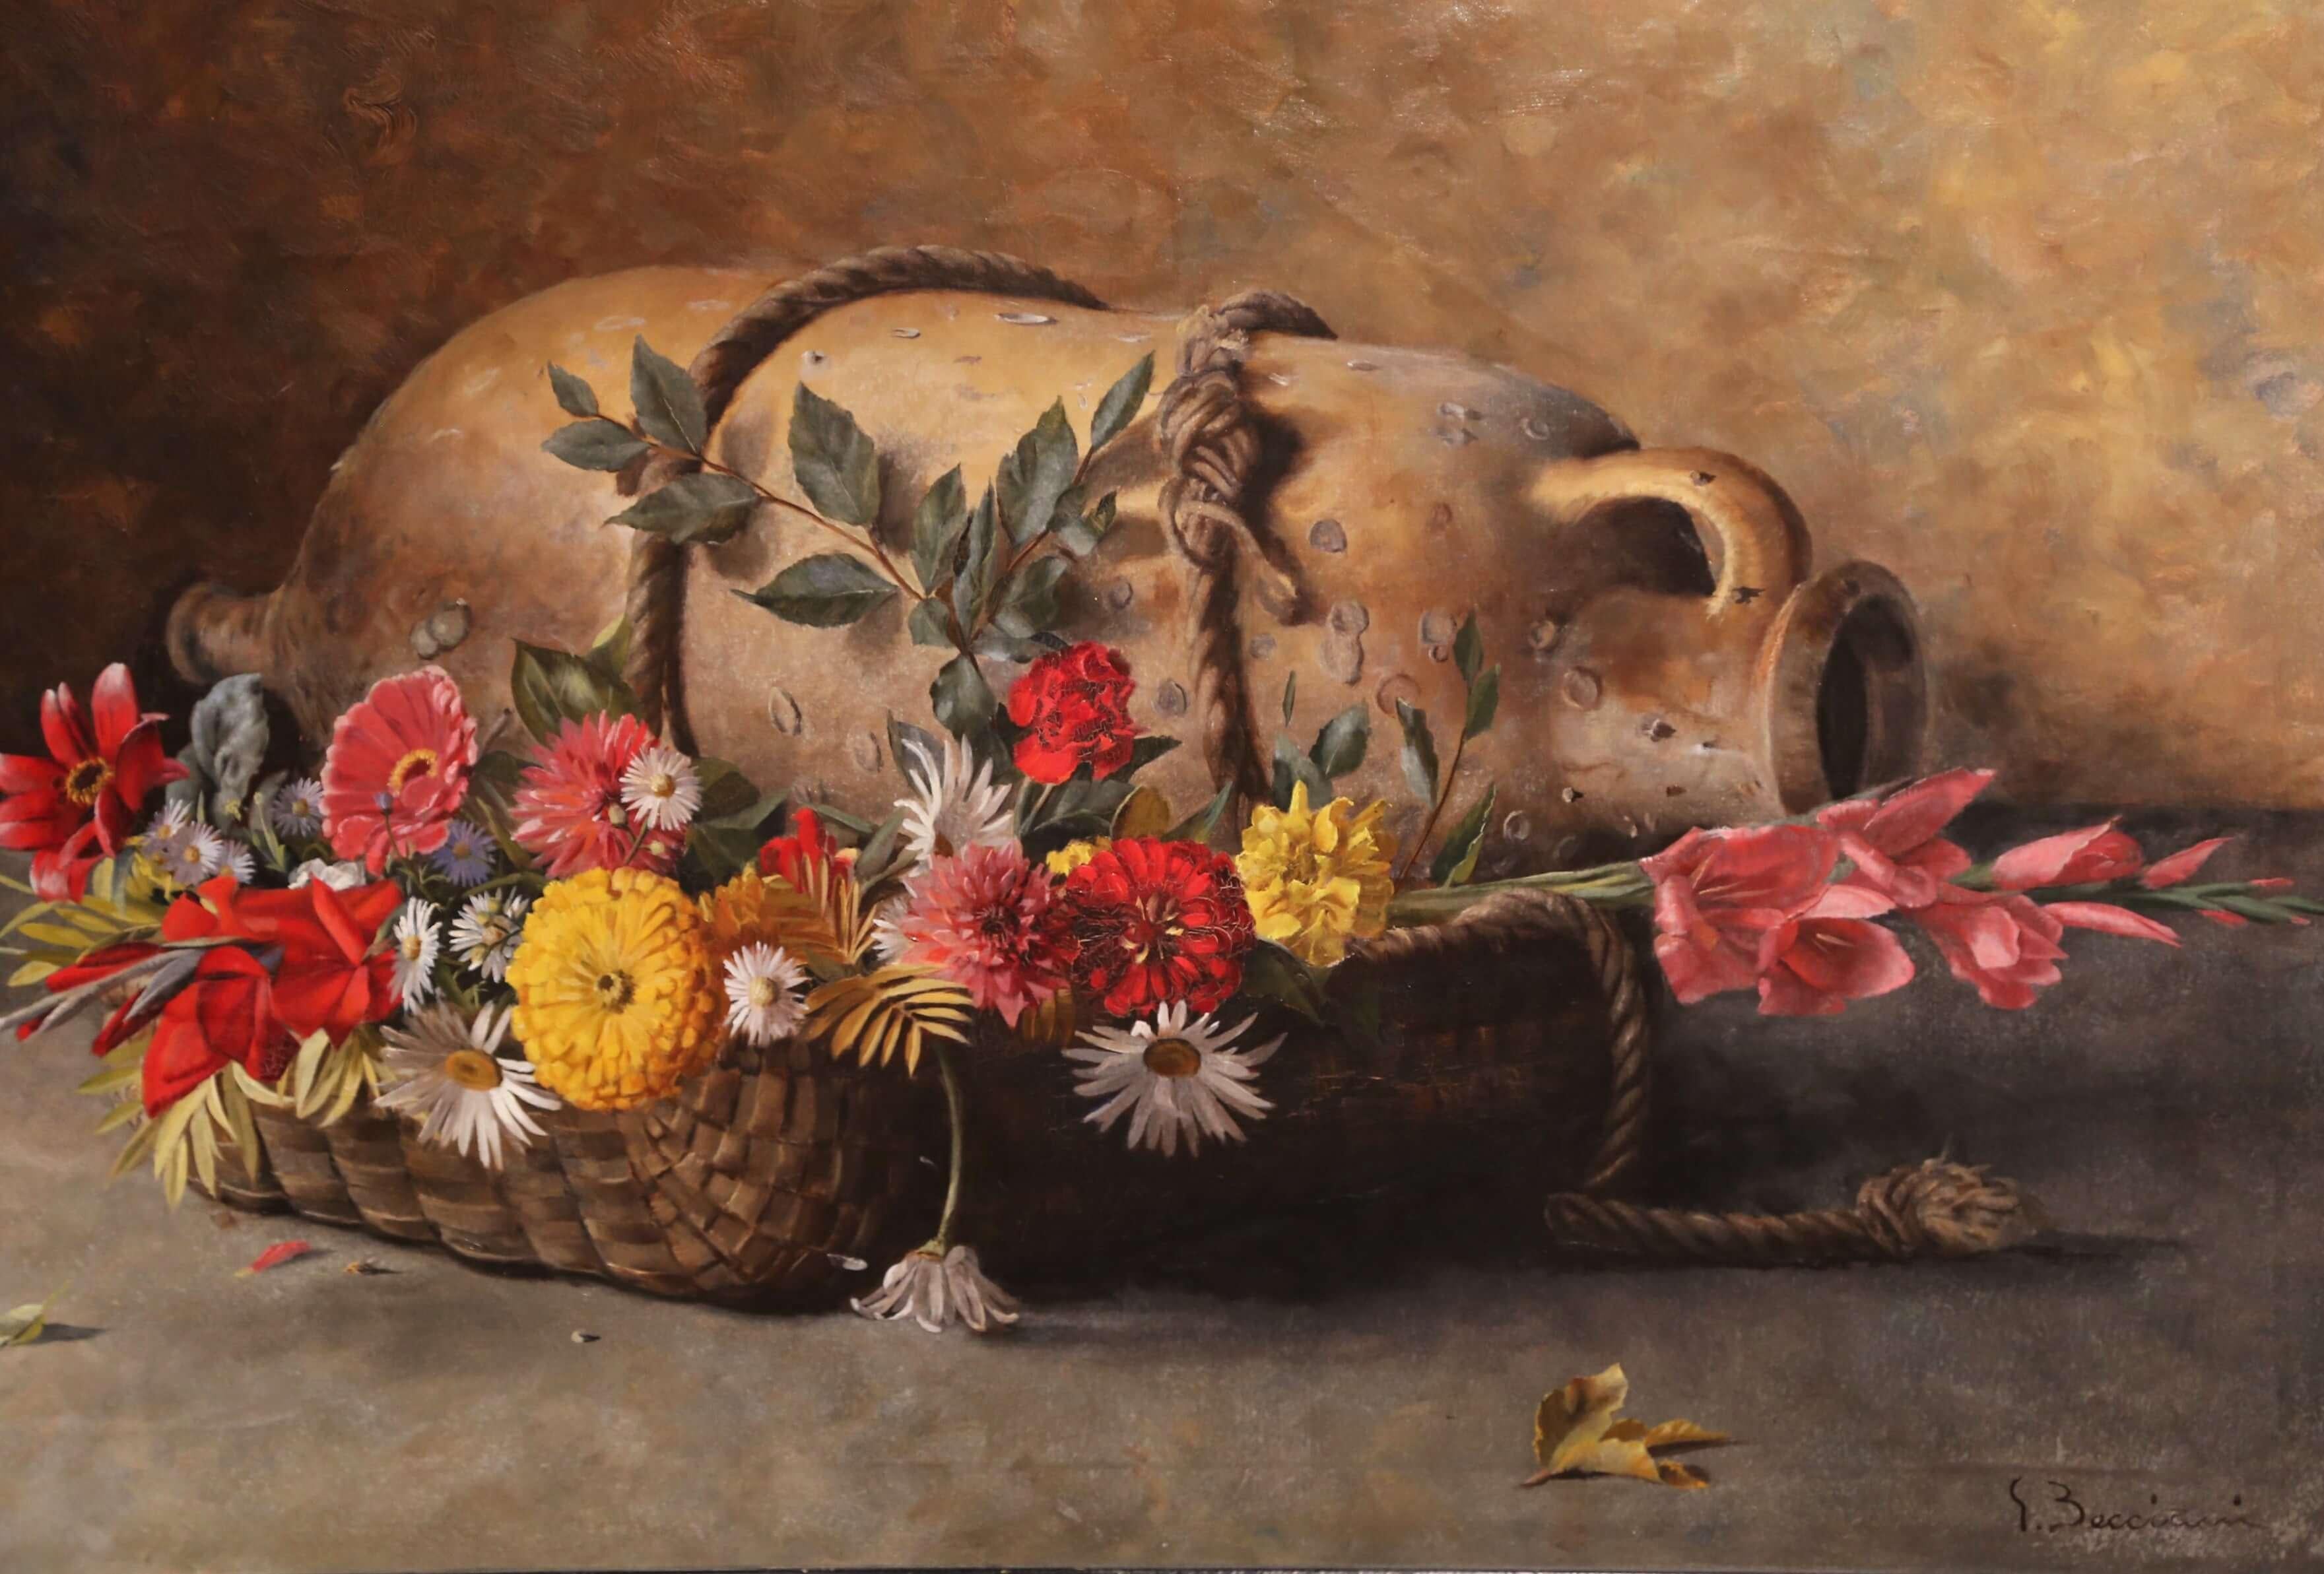 This large oil on canvas still life composition was painted in Italy, circa 1940. Set inside its original, carved giltwood frame, the artwork features a Classic still life scene with an earthenware jug covered with wild flowers. This vivid